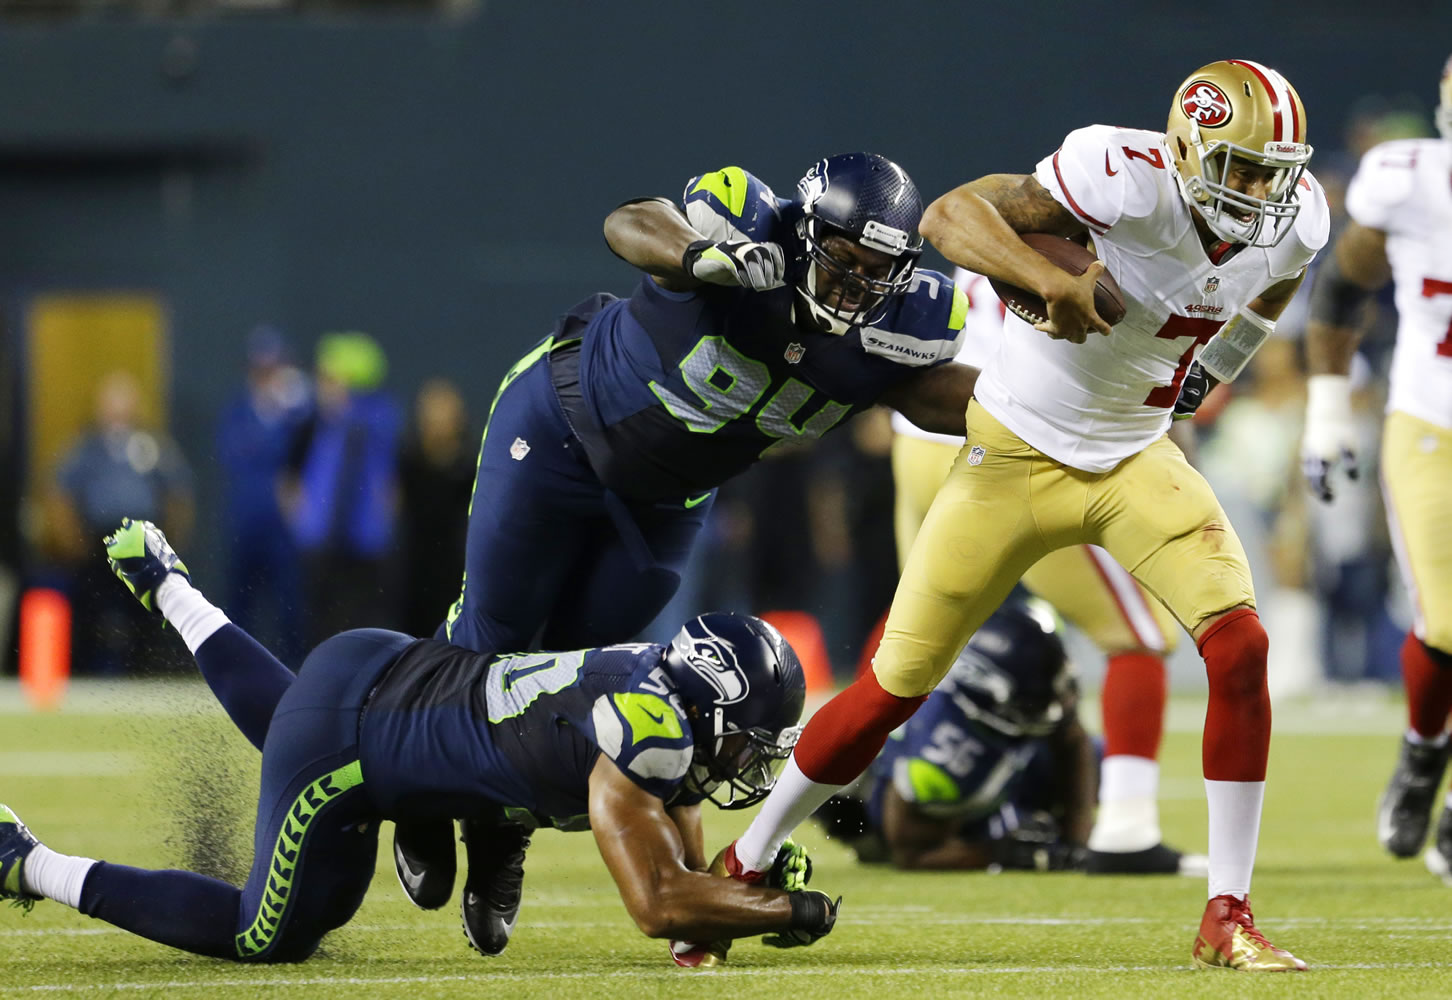 Seattle Seahawks K.J. Wright, left, and D'Anthony Smith give chase to San Francisco 49ers quarterback Colin Kaepernick in the second half Sunday.